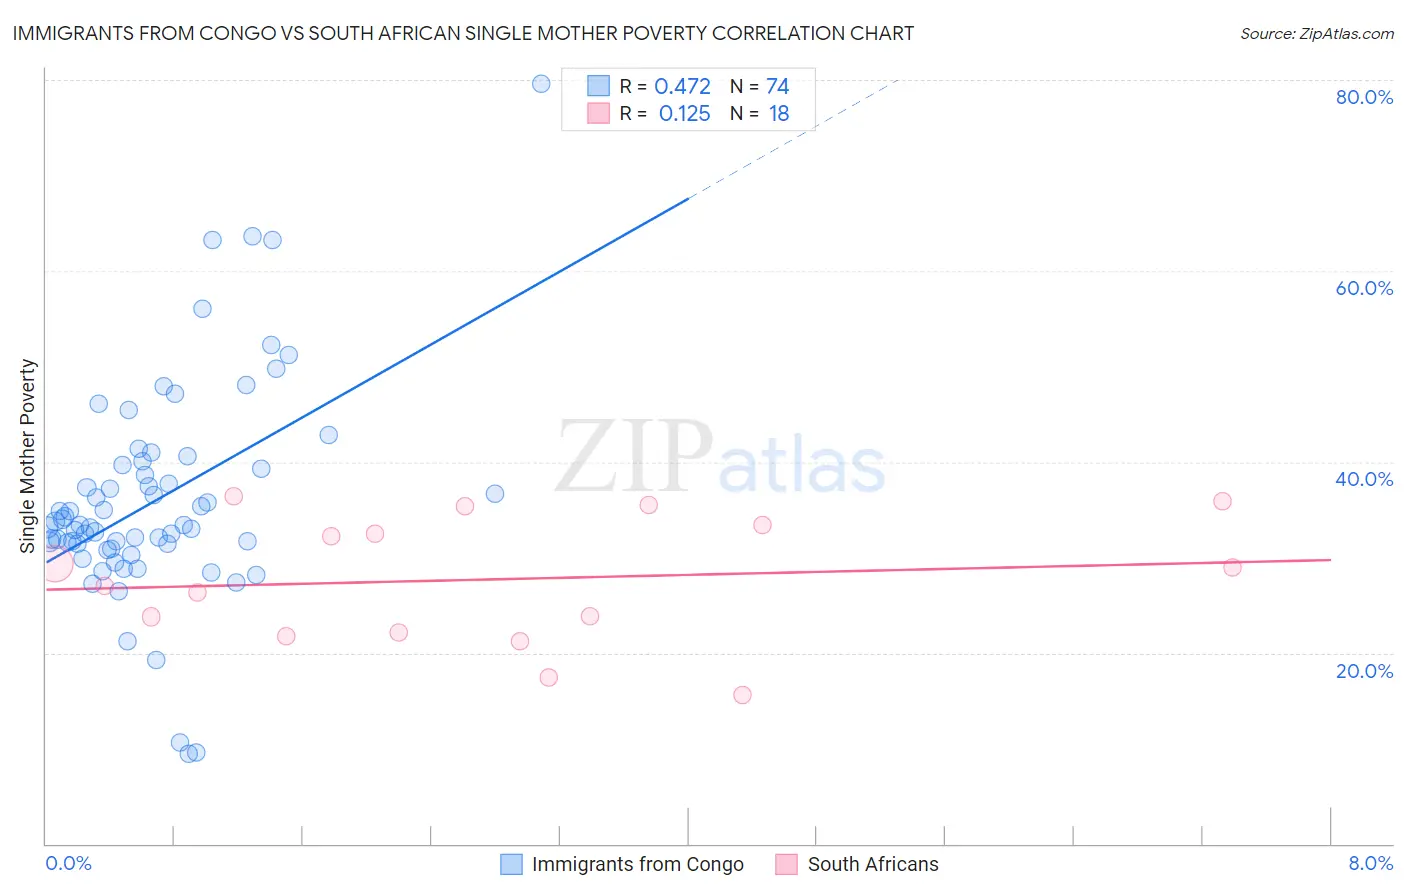 Immigrants from Congo vs South African Single Mother Poverty